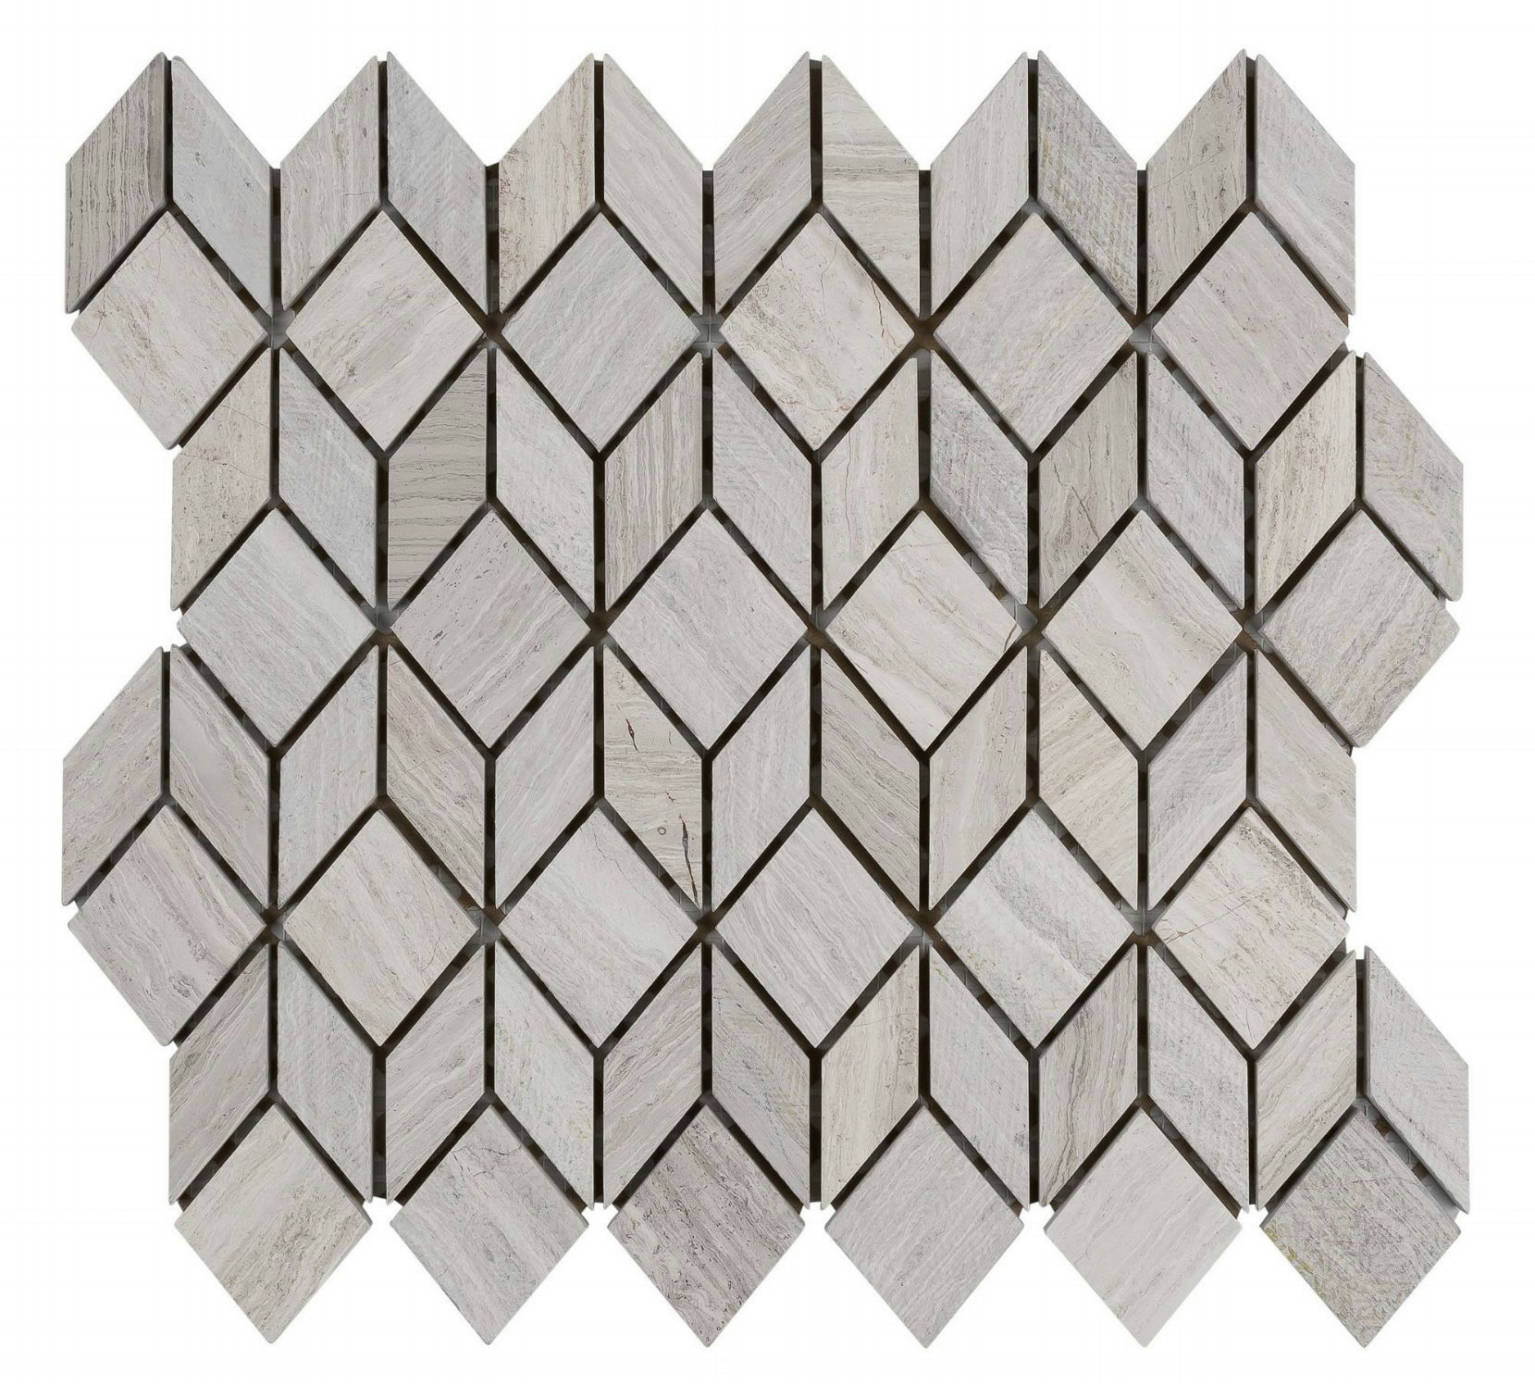 BN011 | Stones & More | Finest selection of Mosaics, Glass, Tile and Stone